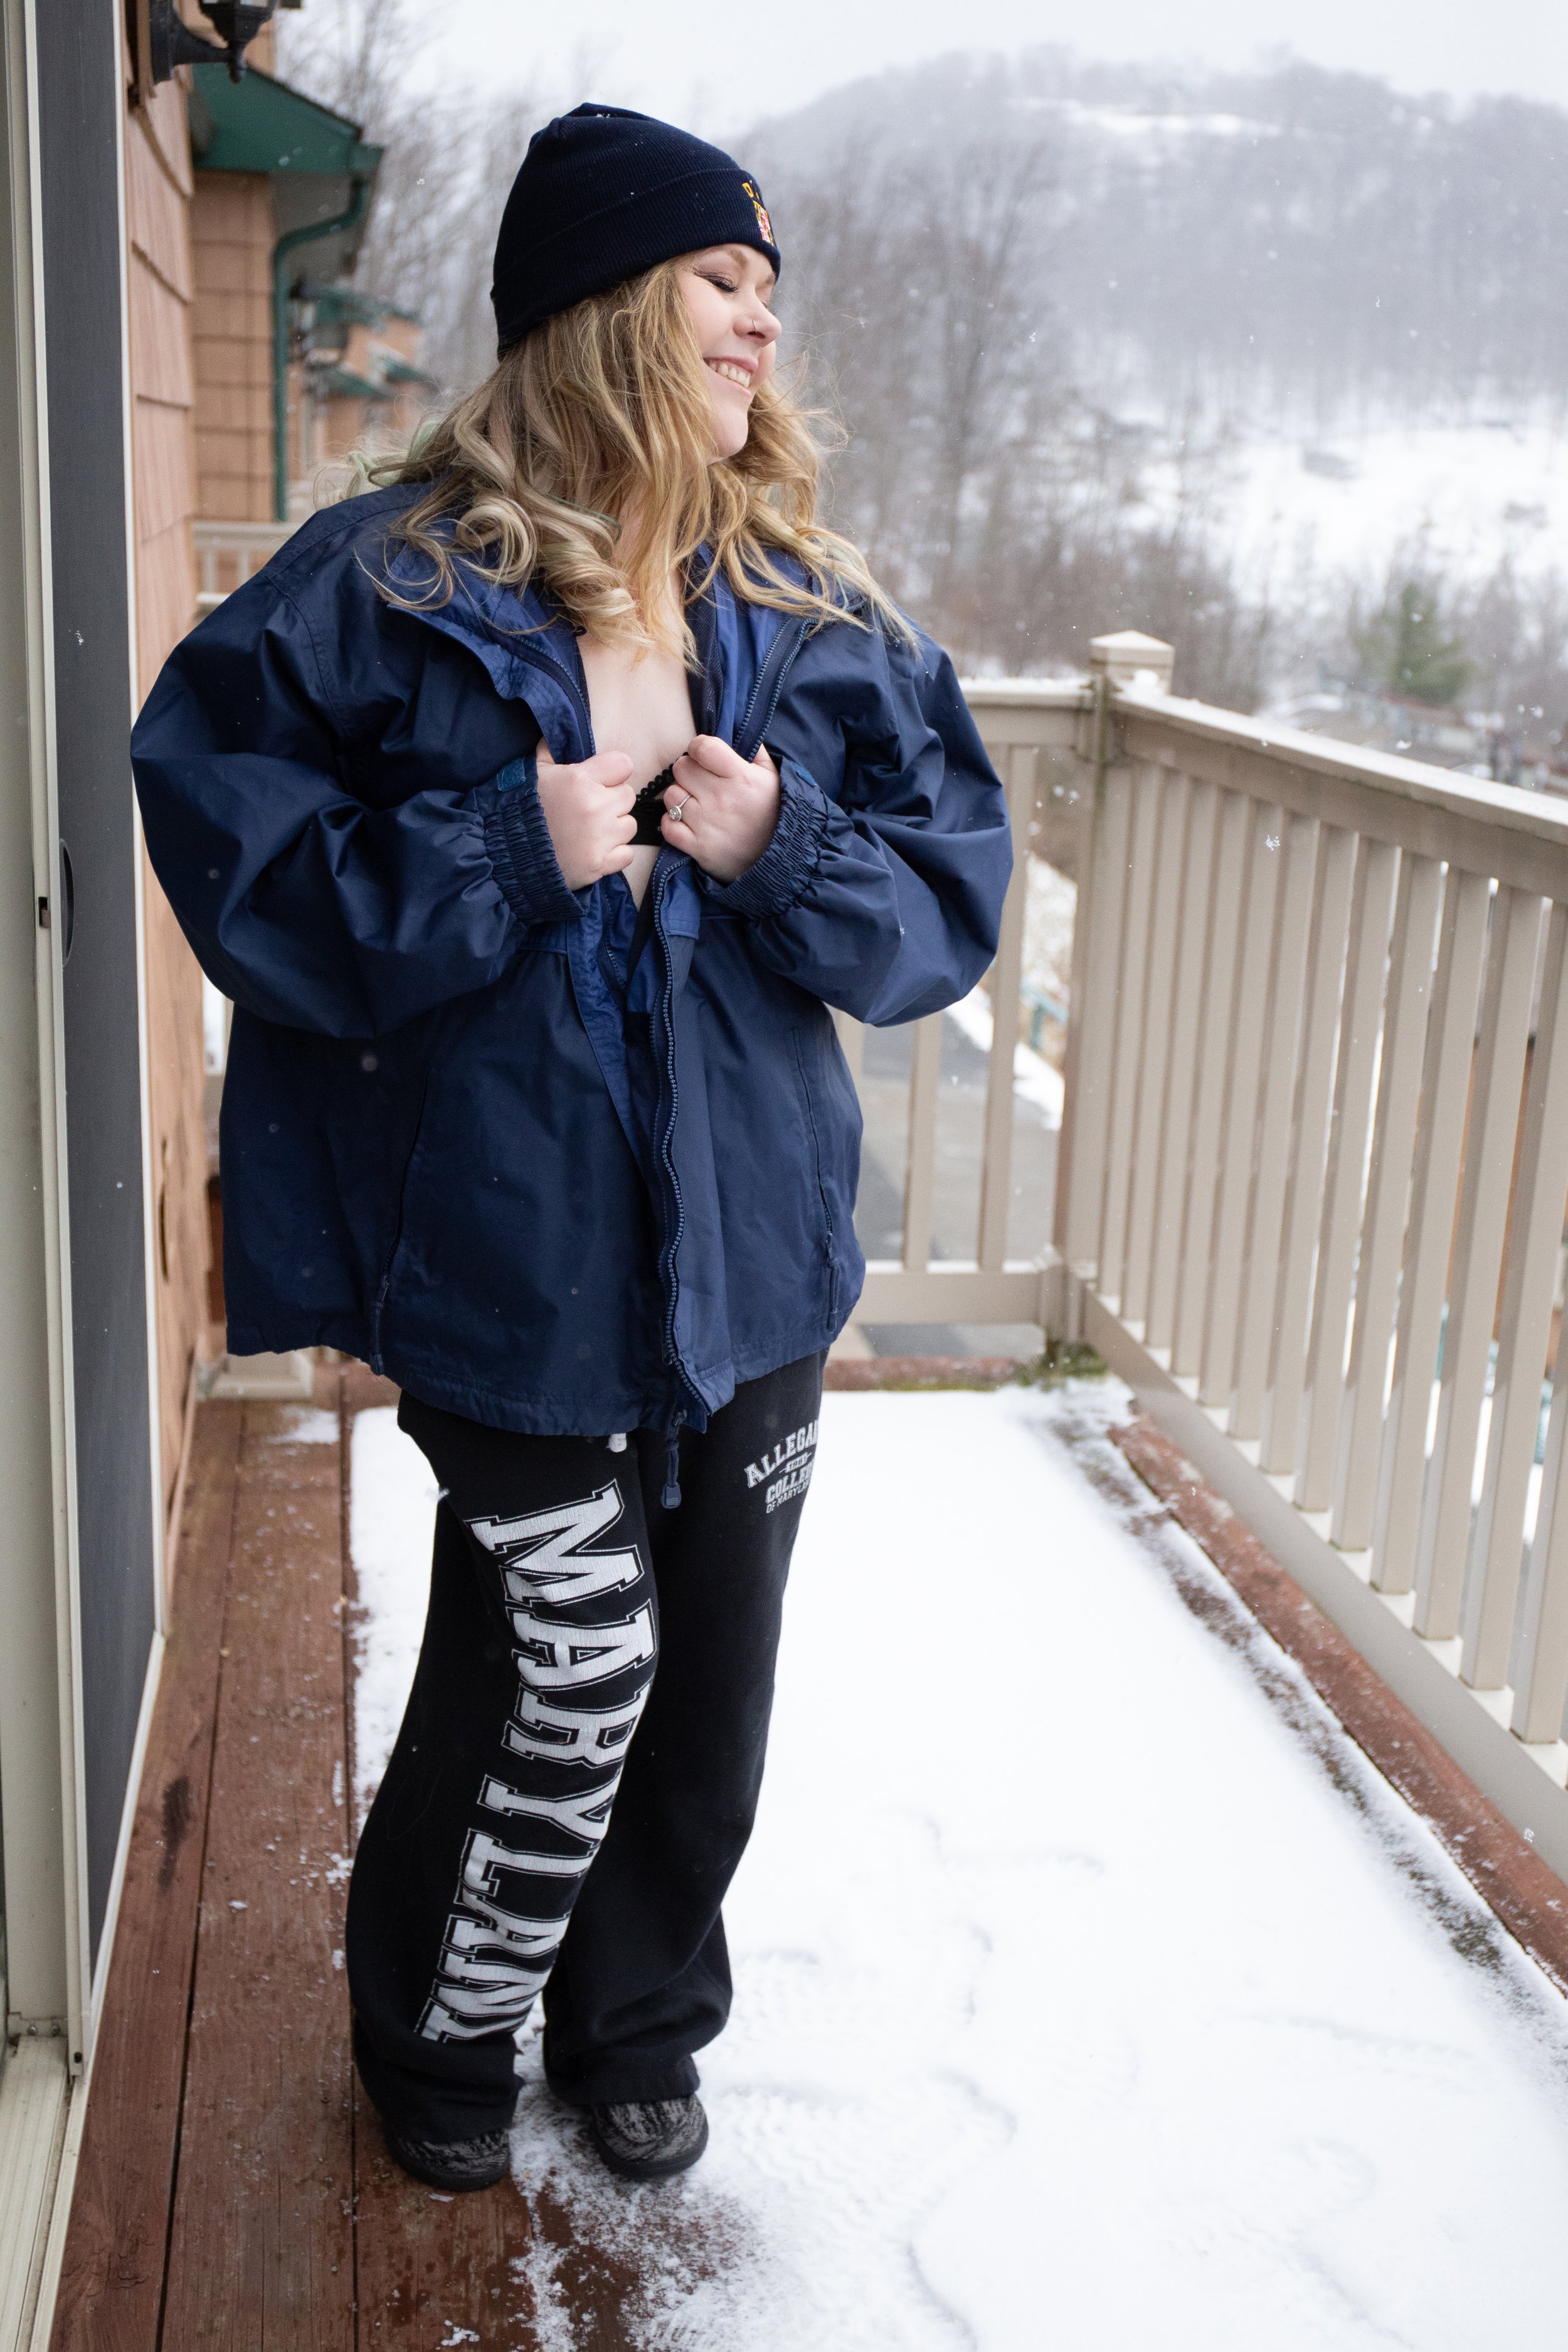 Winter photo session in Morgantown, WV